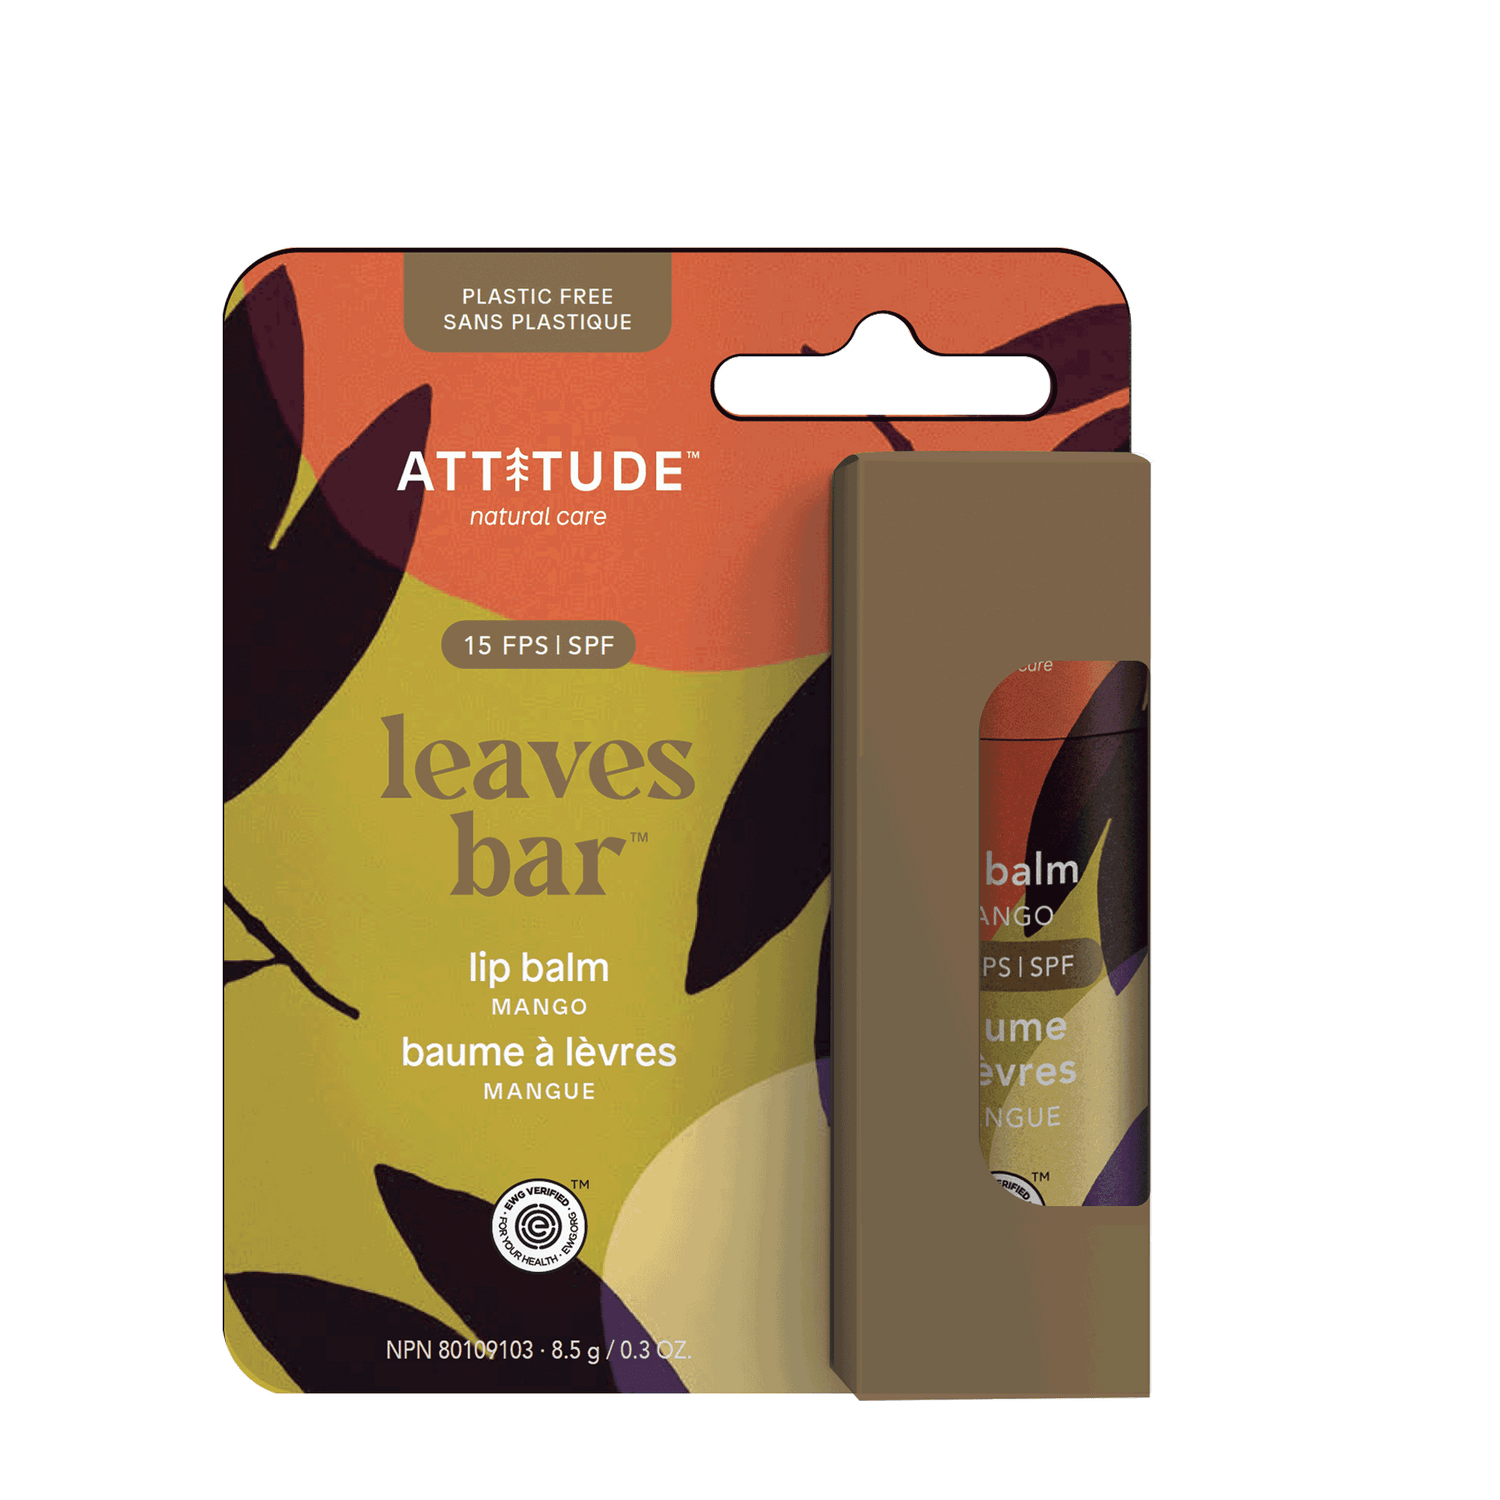 Attitude Personal Care Products